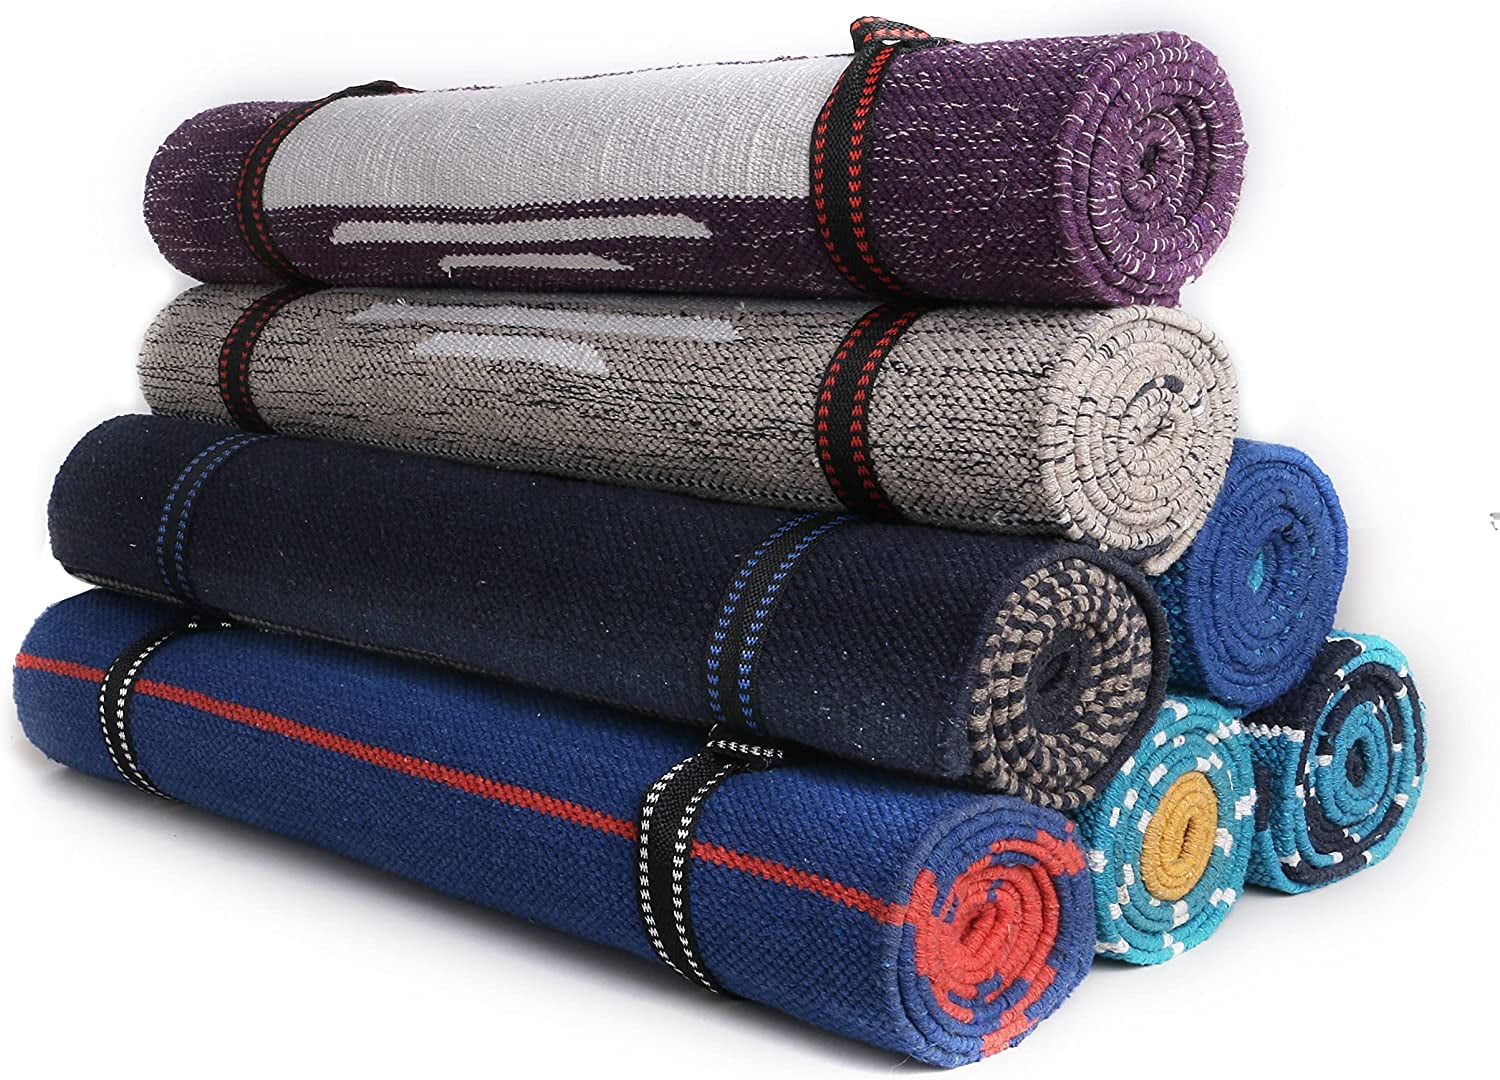 KD Cotton Yoga Mat Hand Woven Yoga Mat Eco Freindly Organic Handloom Mat  Supreme Heavy Quality with Carry Strap- 24 x 72 Exercise Mat - Navy Blue  